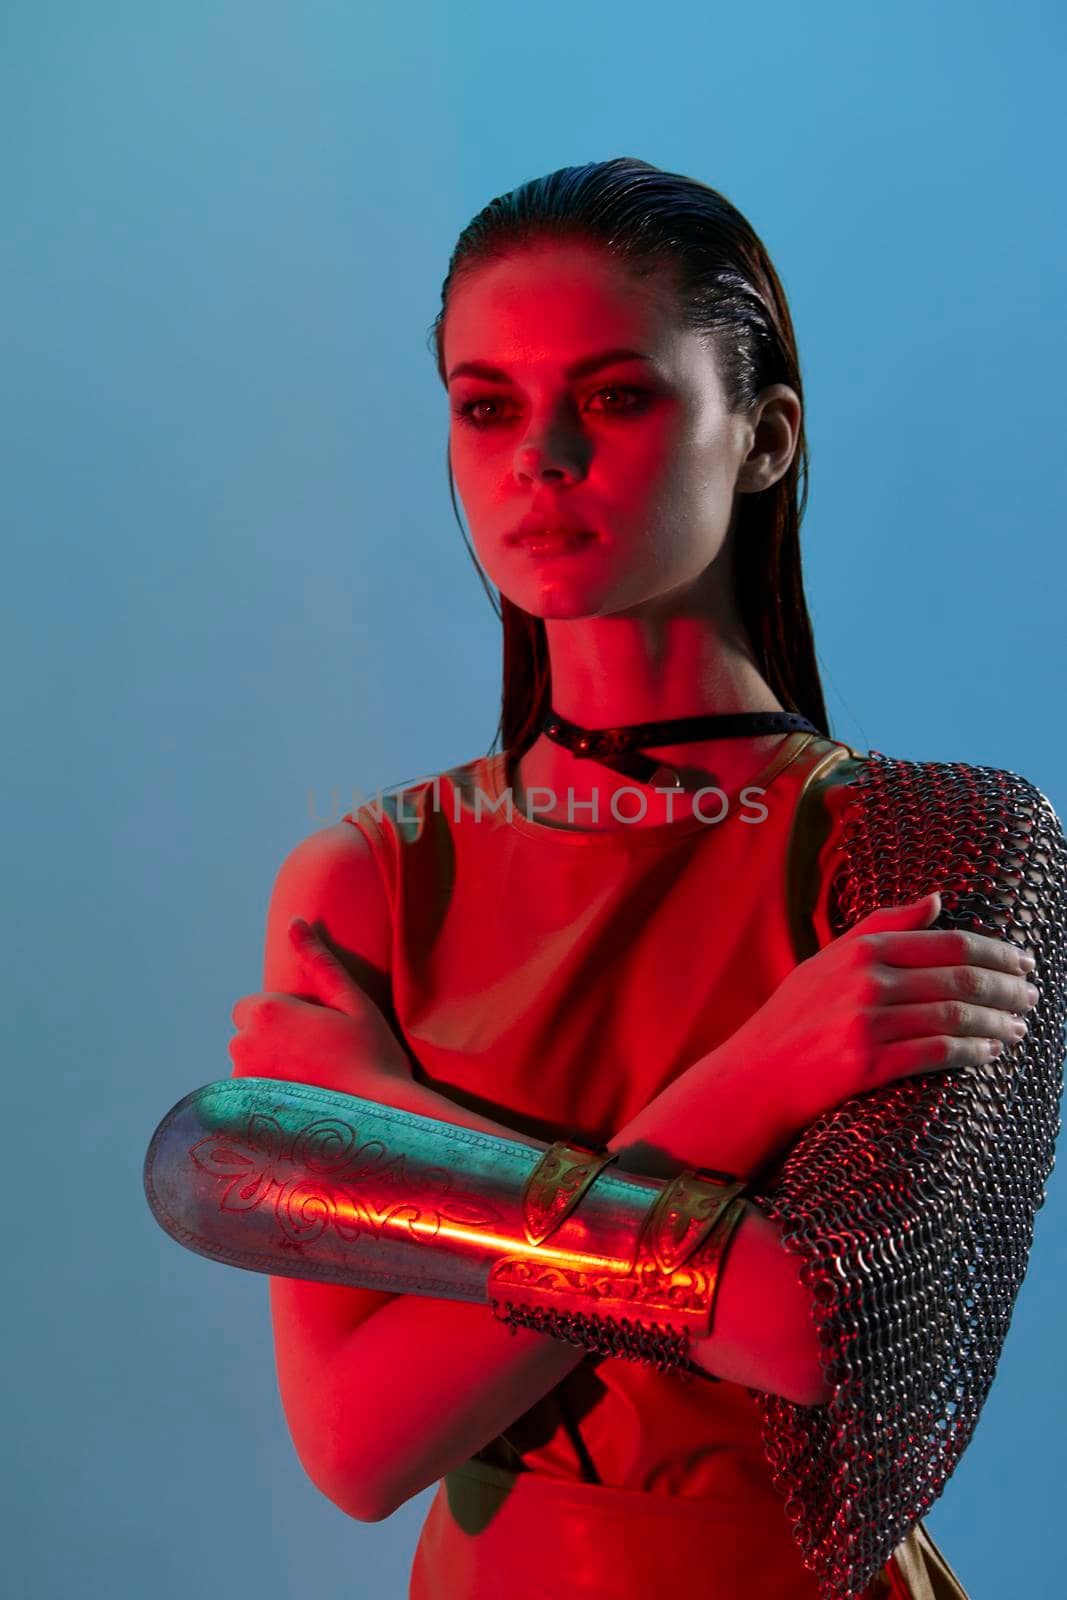 attractive woman Glamor posing red light metal armor on hand unaltered. High quality photo